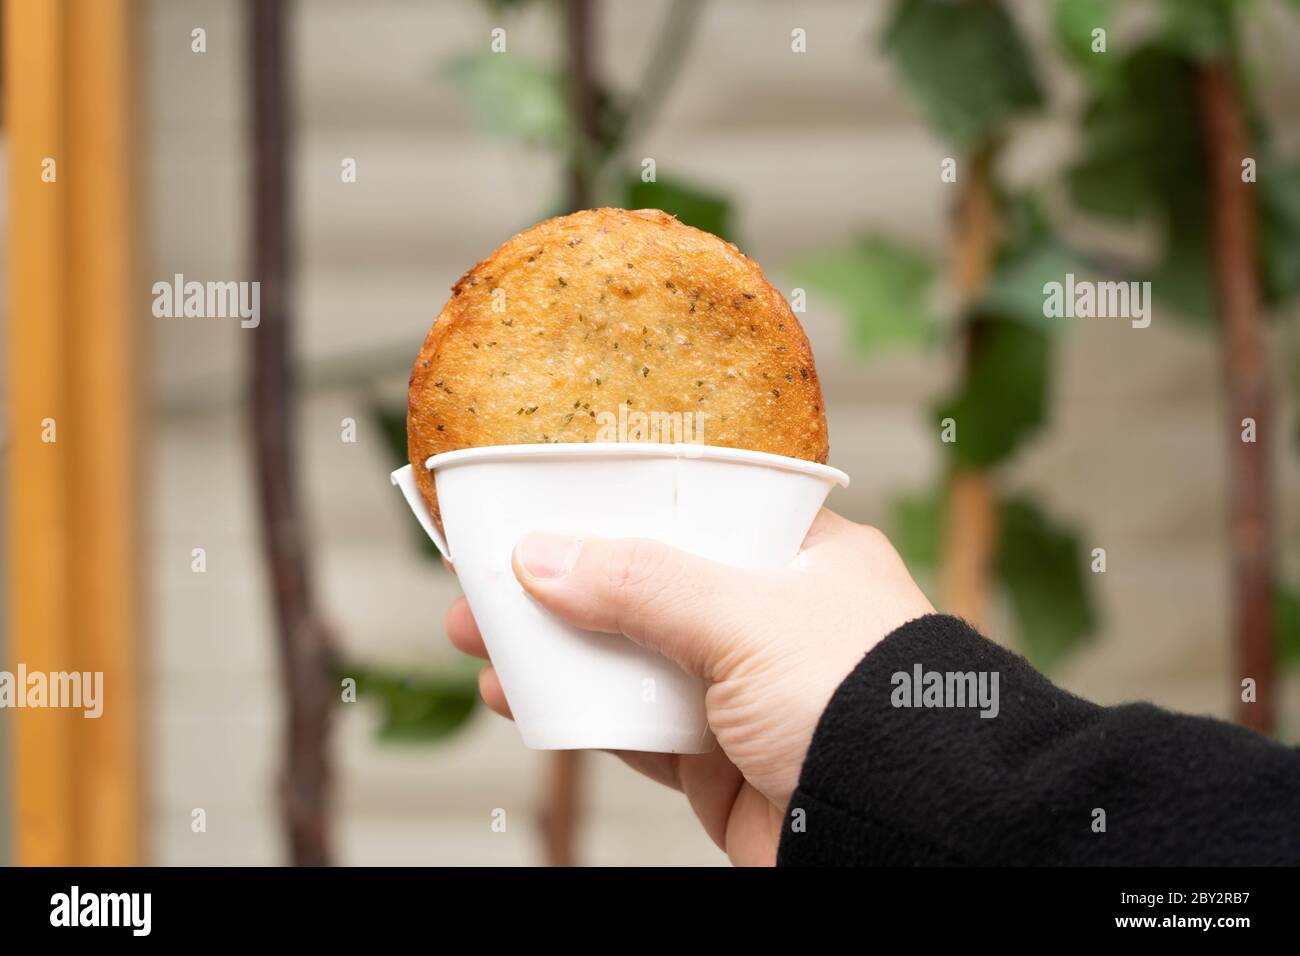 Hand holding a Korean traditional street food, deep fried pancake, Hotteok, with sweet fillings in a cup. Stock Photo